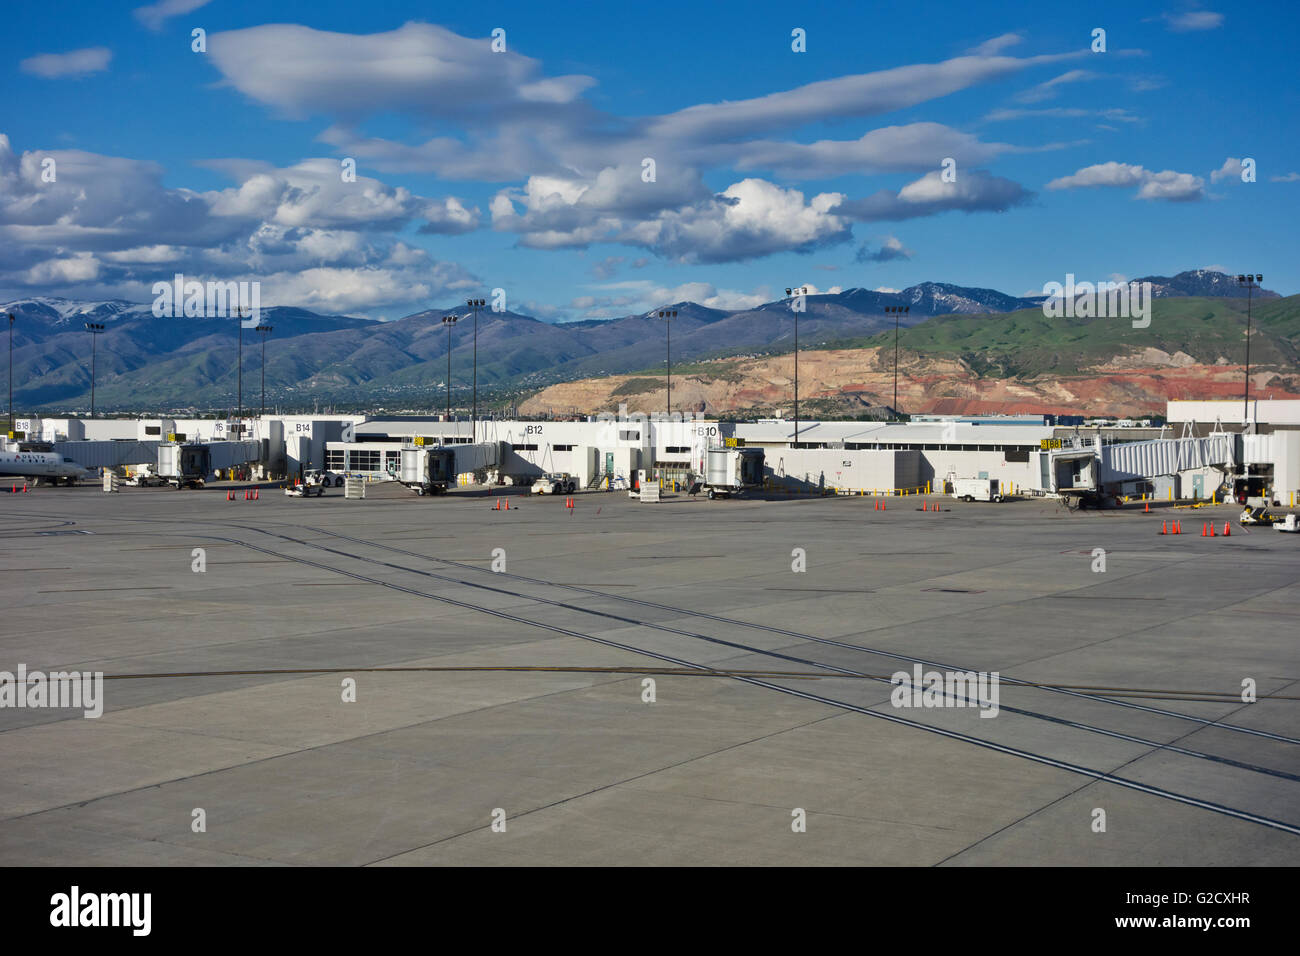 Tarmac and exterior departure and arrival gates at the Salt Lake City International Airport.  Mountains scenery. Stock Photo